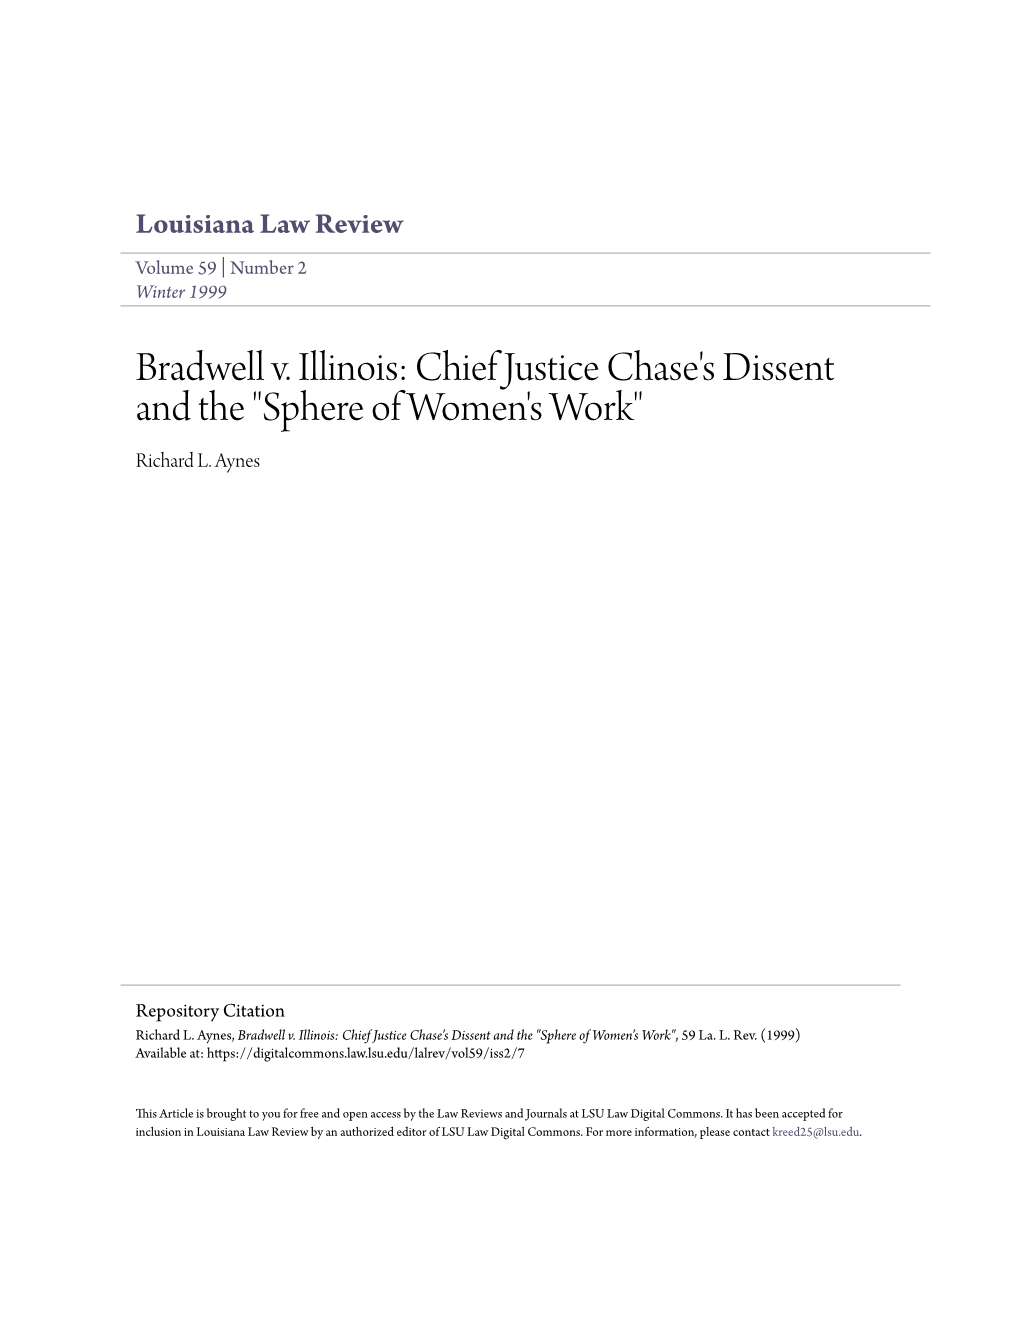 Bradwell V. Illinois: Chief Justice Chase's Dissent and the "Sphere of Women's Work" Richard L